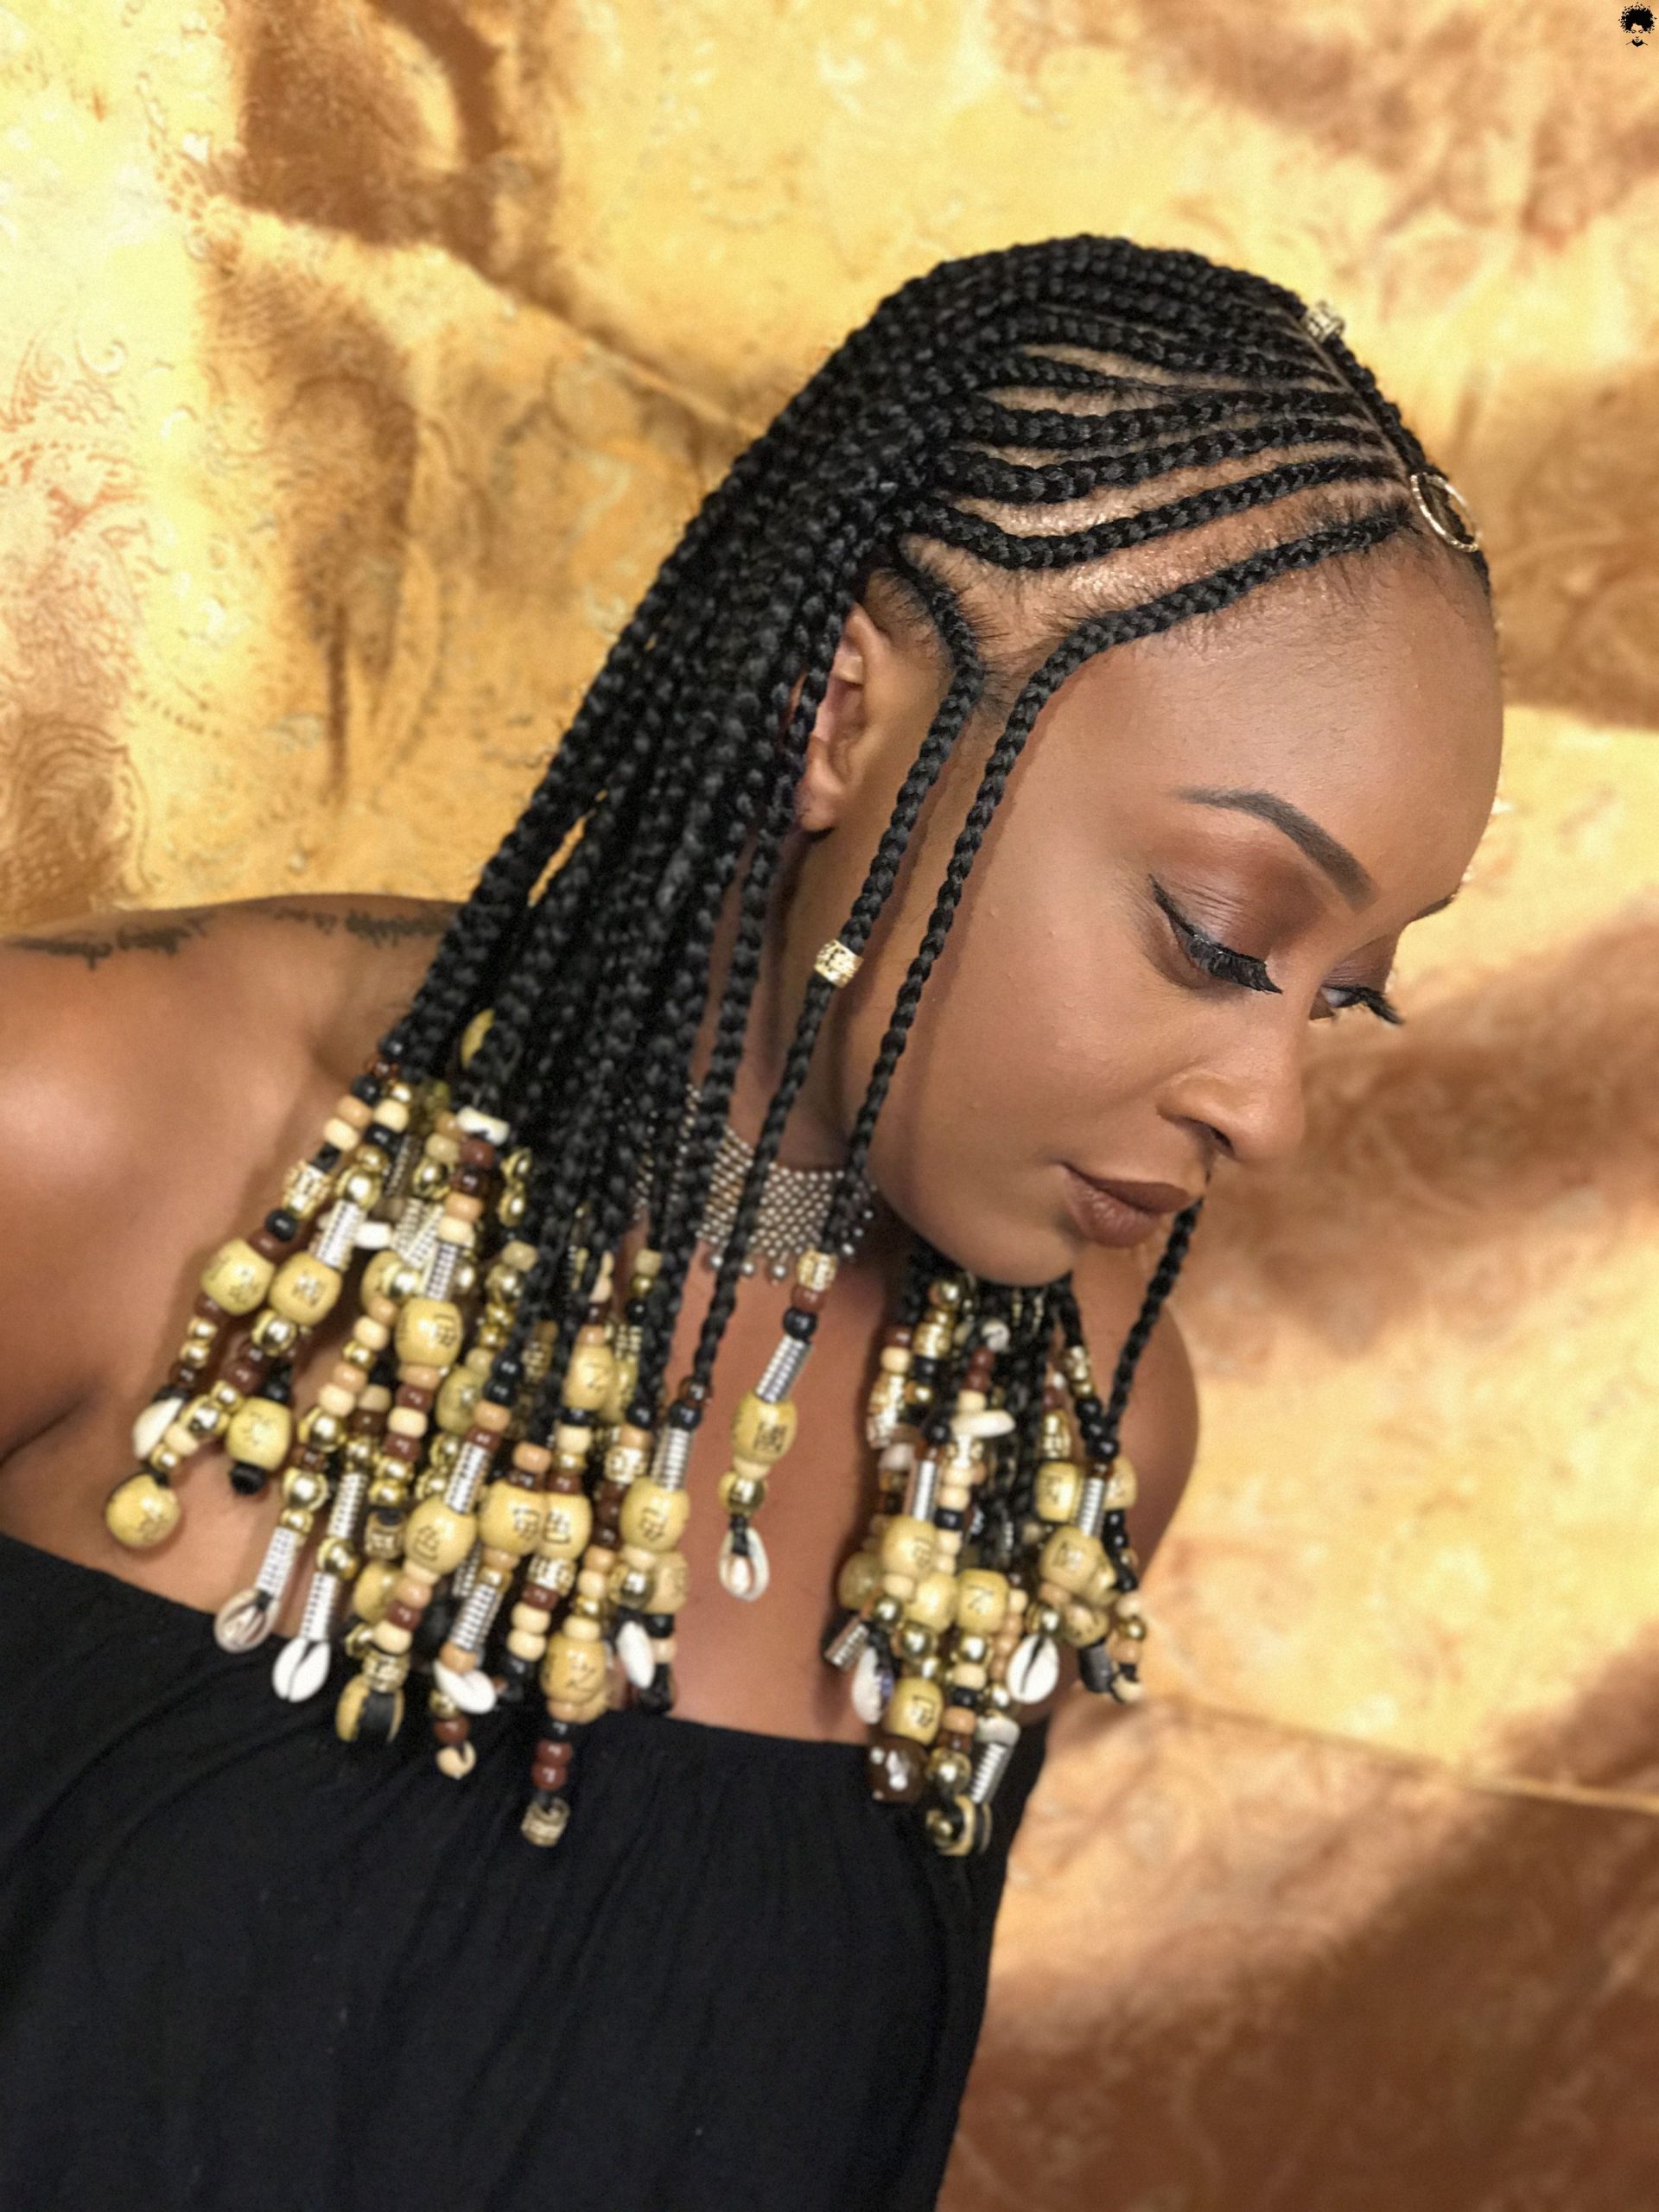 2021 Hot Hair Concepts 49 Trendiest Braids Hairstyles 017 scaled